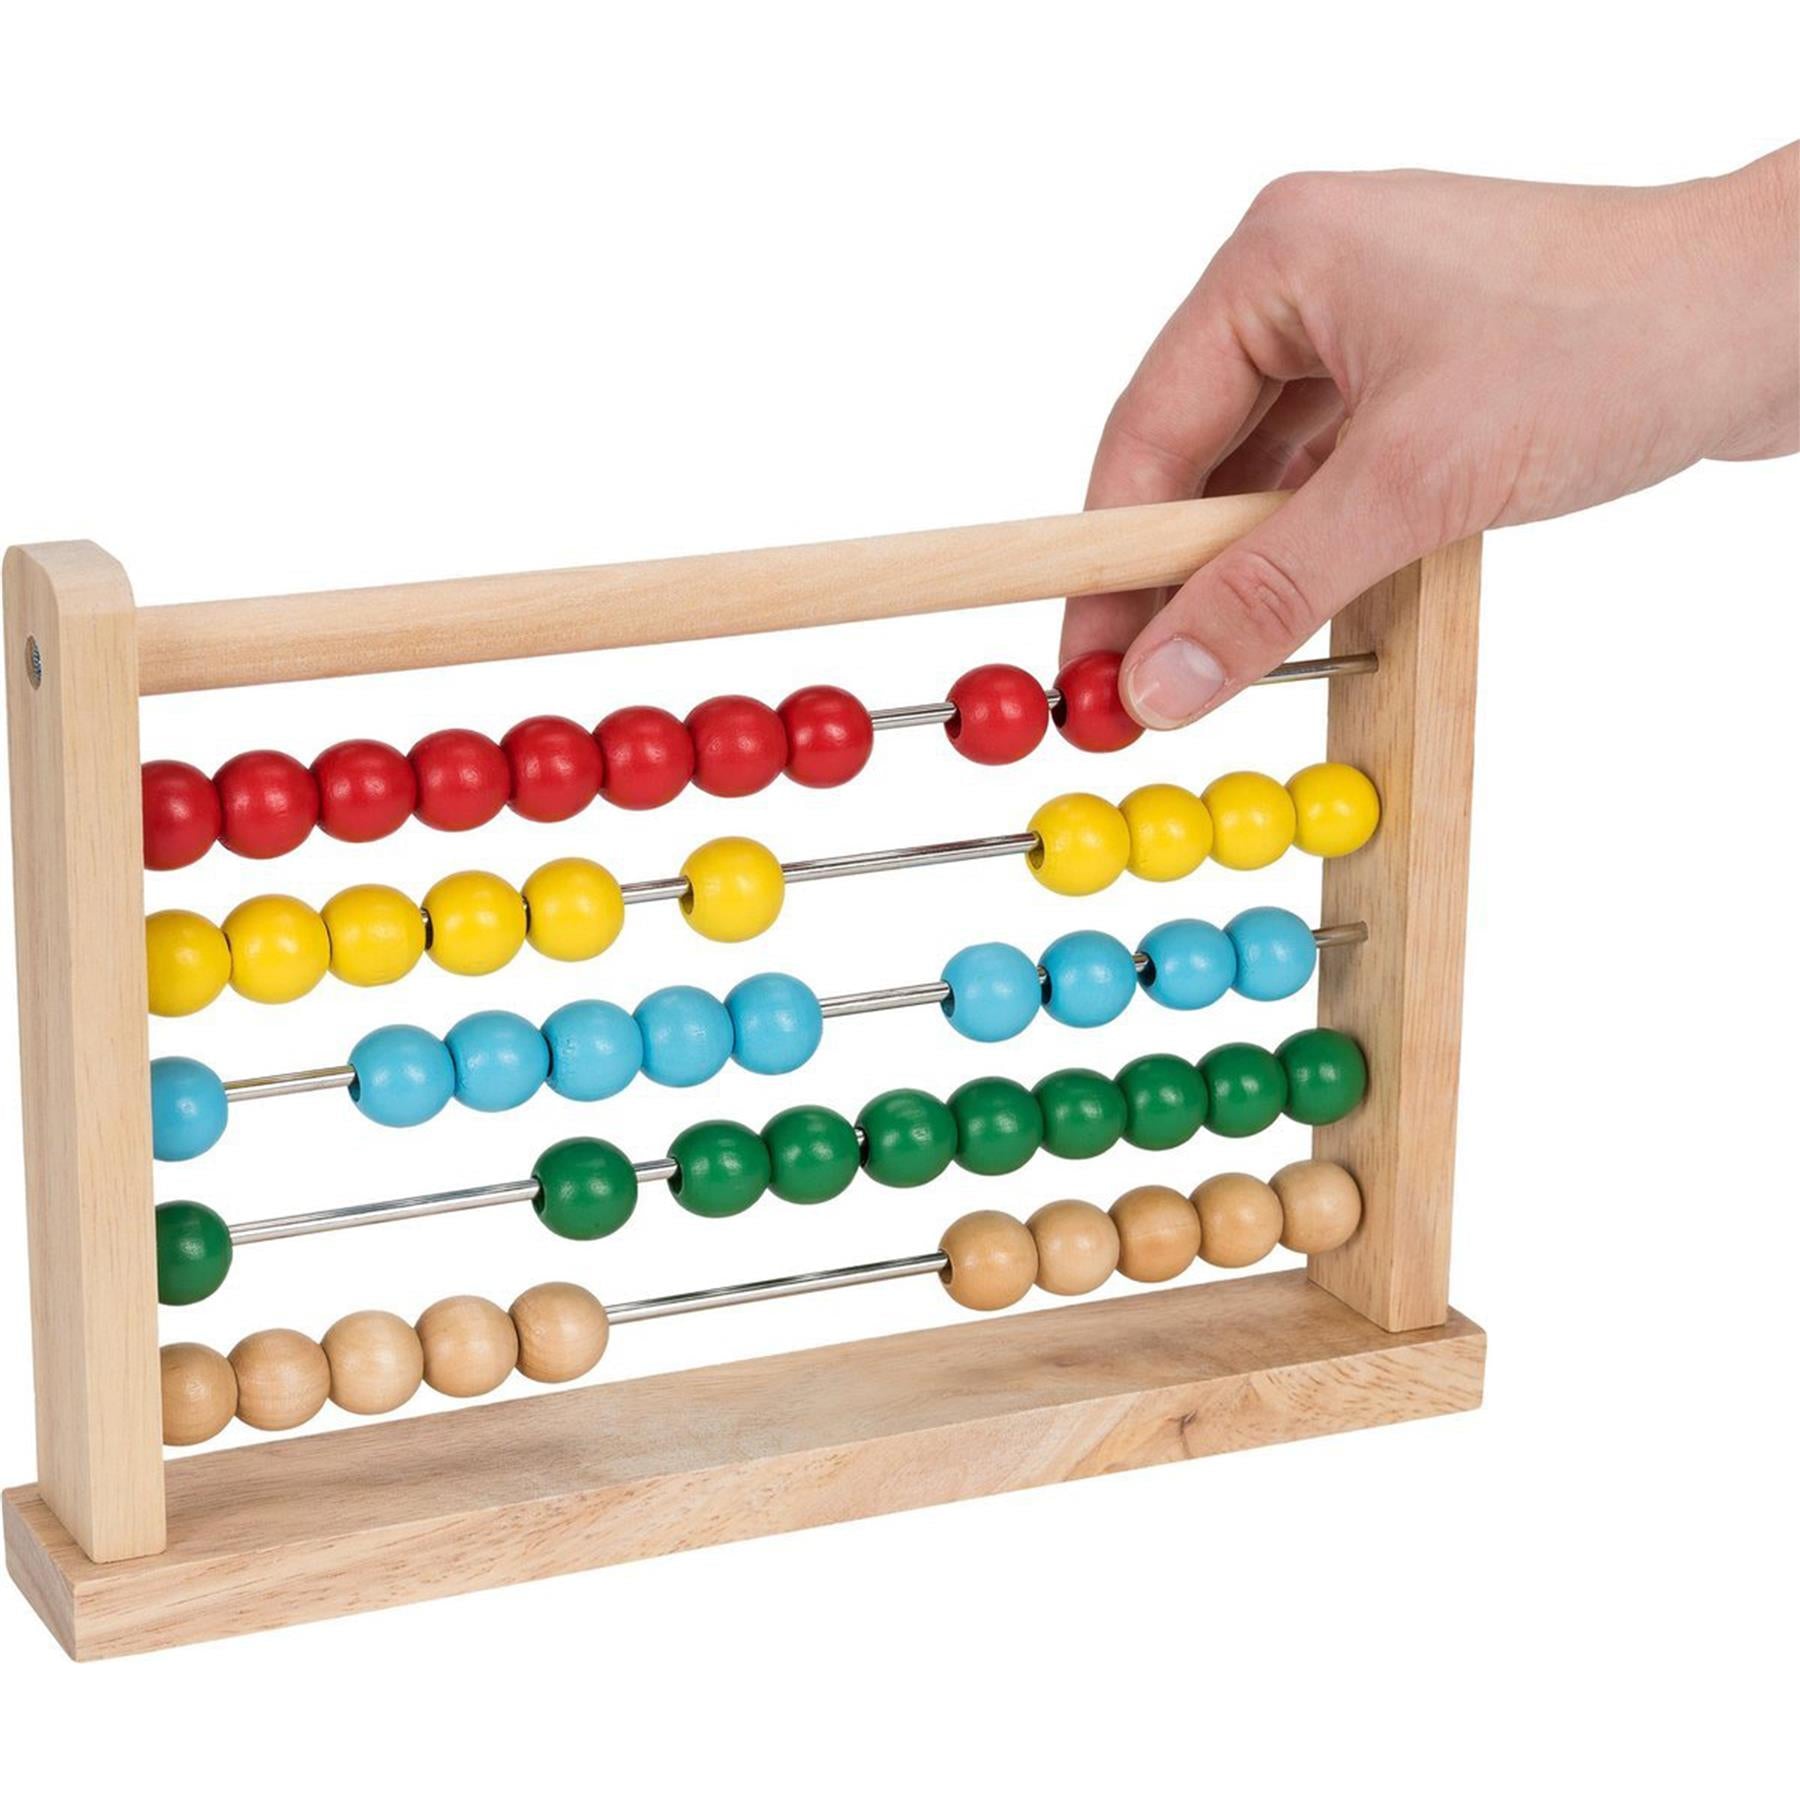 Large Sturdy Wooden Abacus by The Magic Toy Shop - The Magic Toy Shop